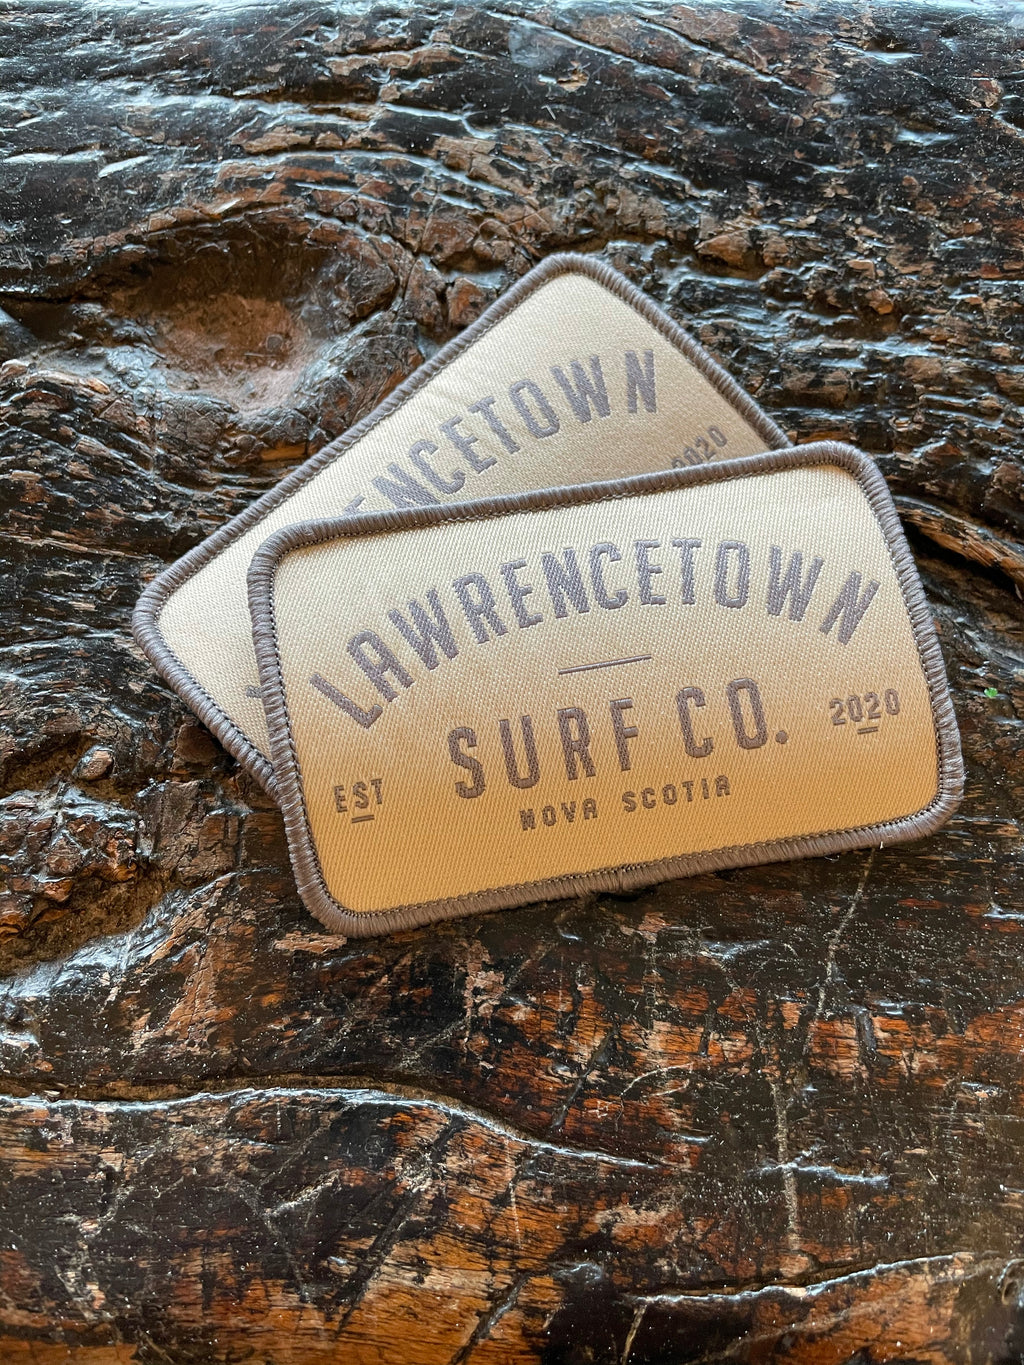 Lawrencetown Surf Co Patches